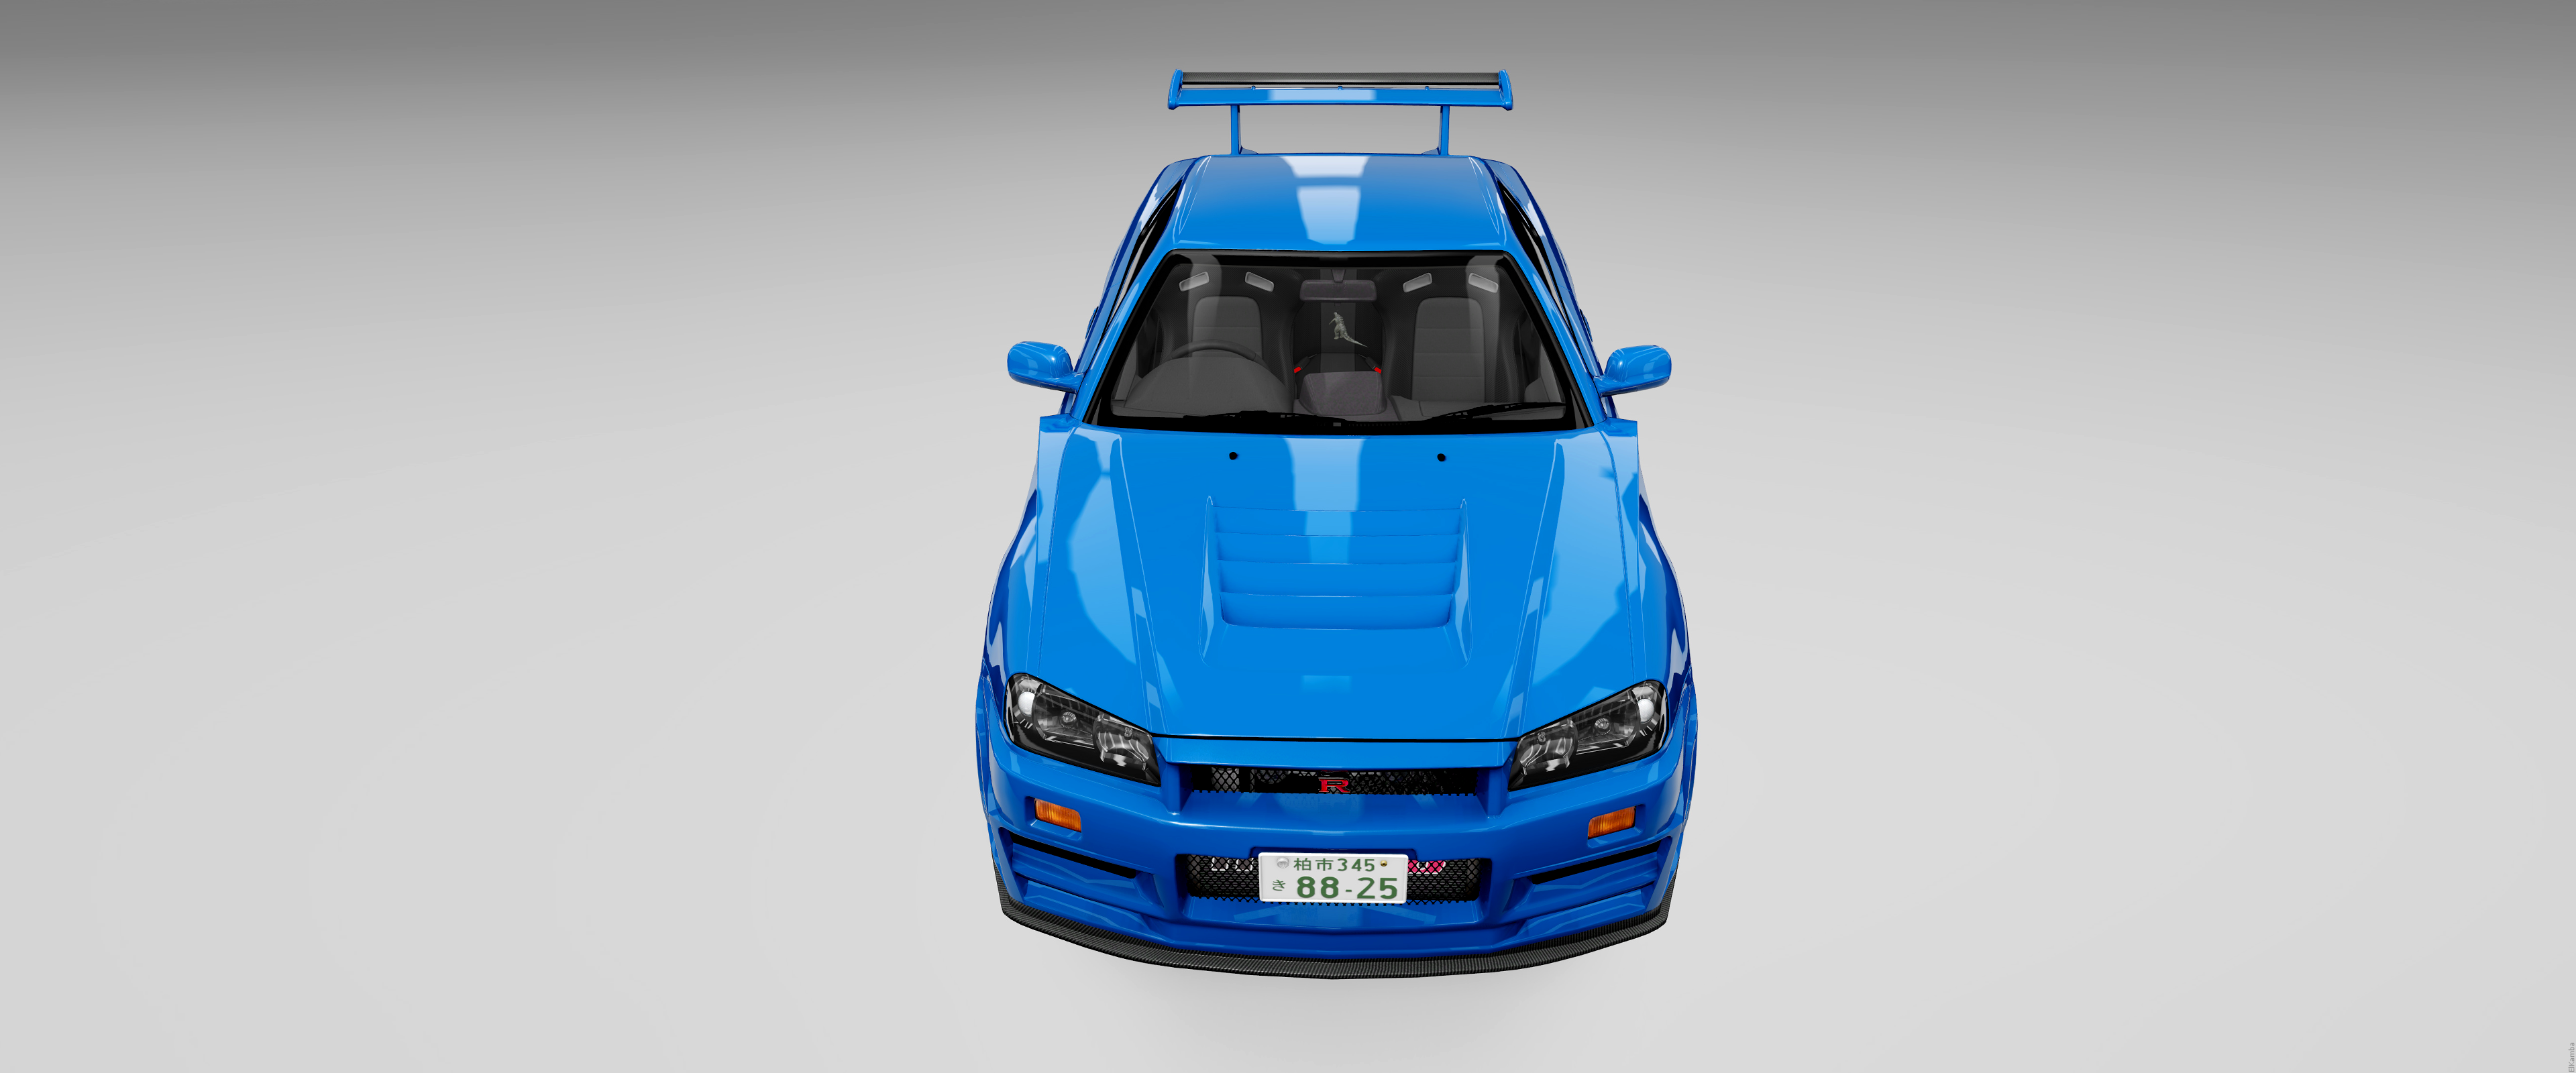 General 3840x1600 car wide screen vehicle Japanese cars minimalism Nissan Nissan Skyline R34 frontal view high angle simple background gray background Nissan Skyline car spoiler